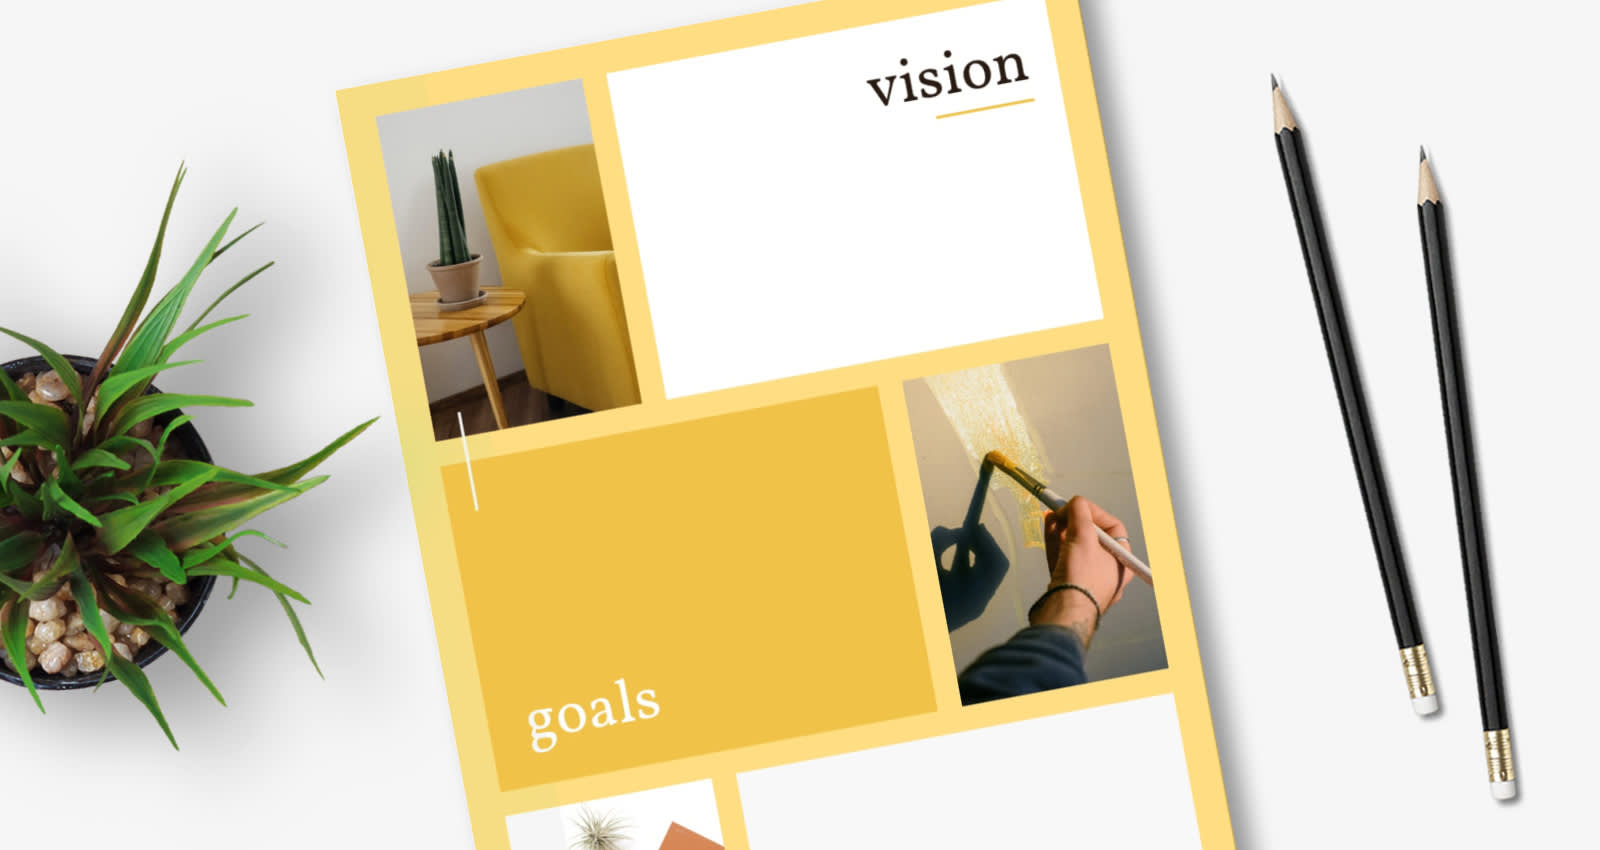 Can a Vision Board Really Affect Your Future?